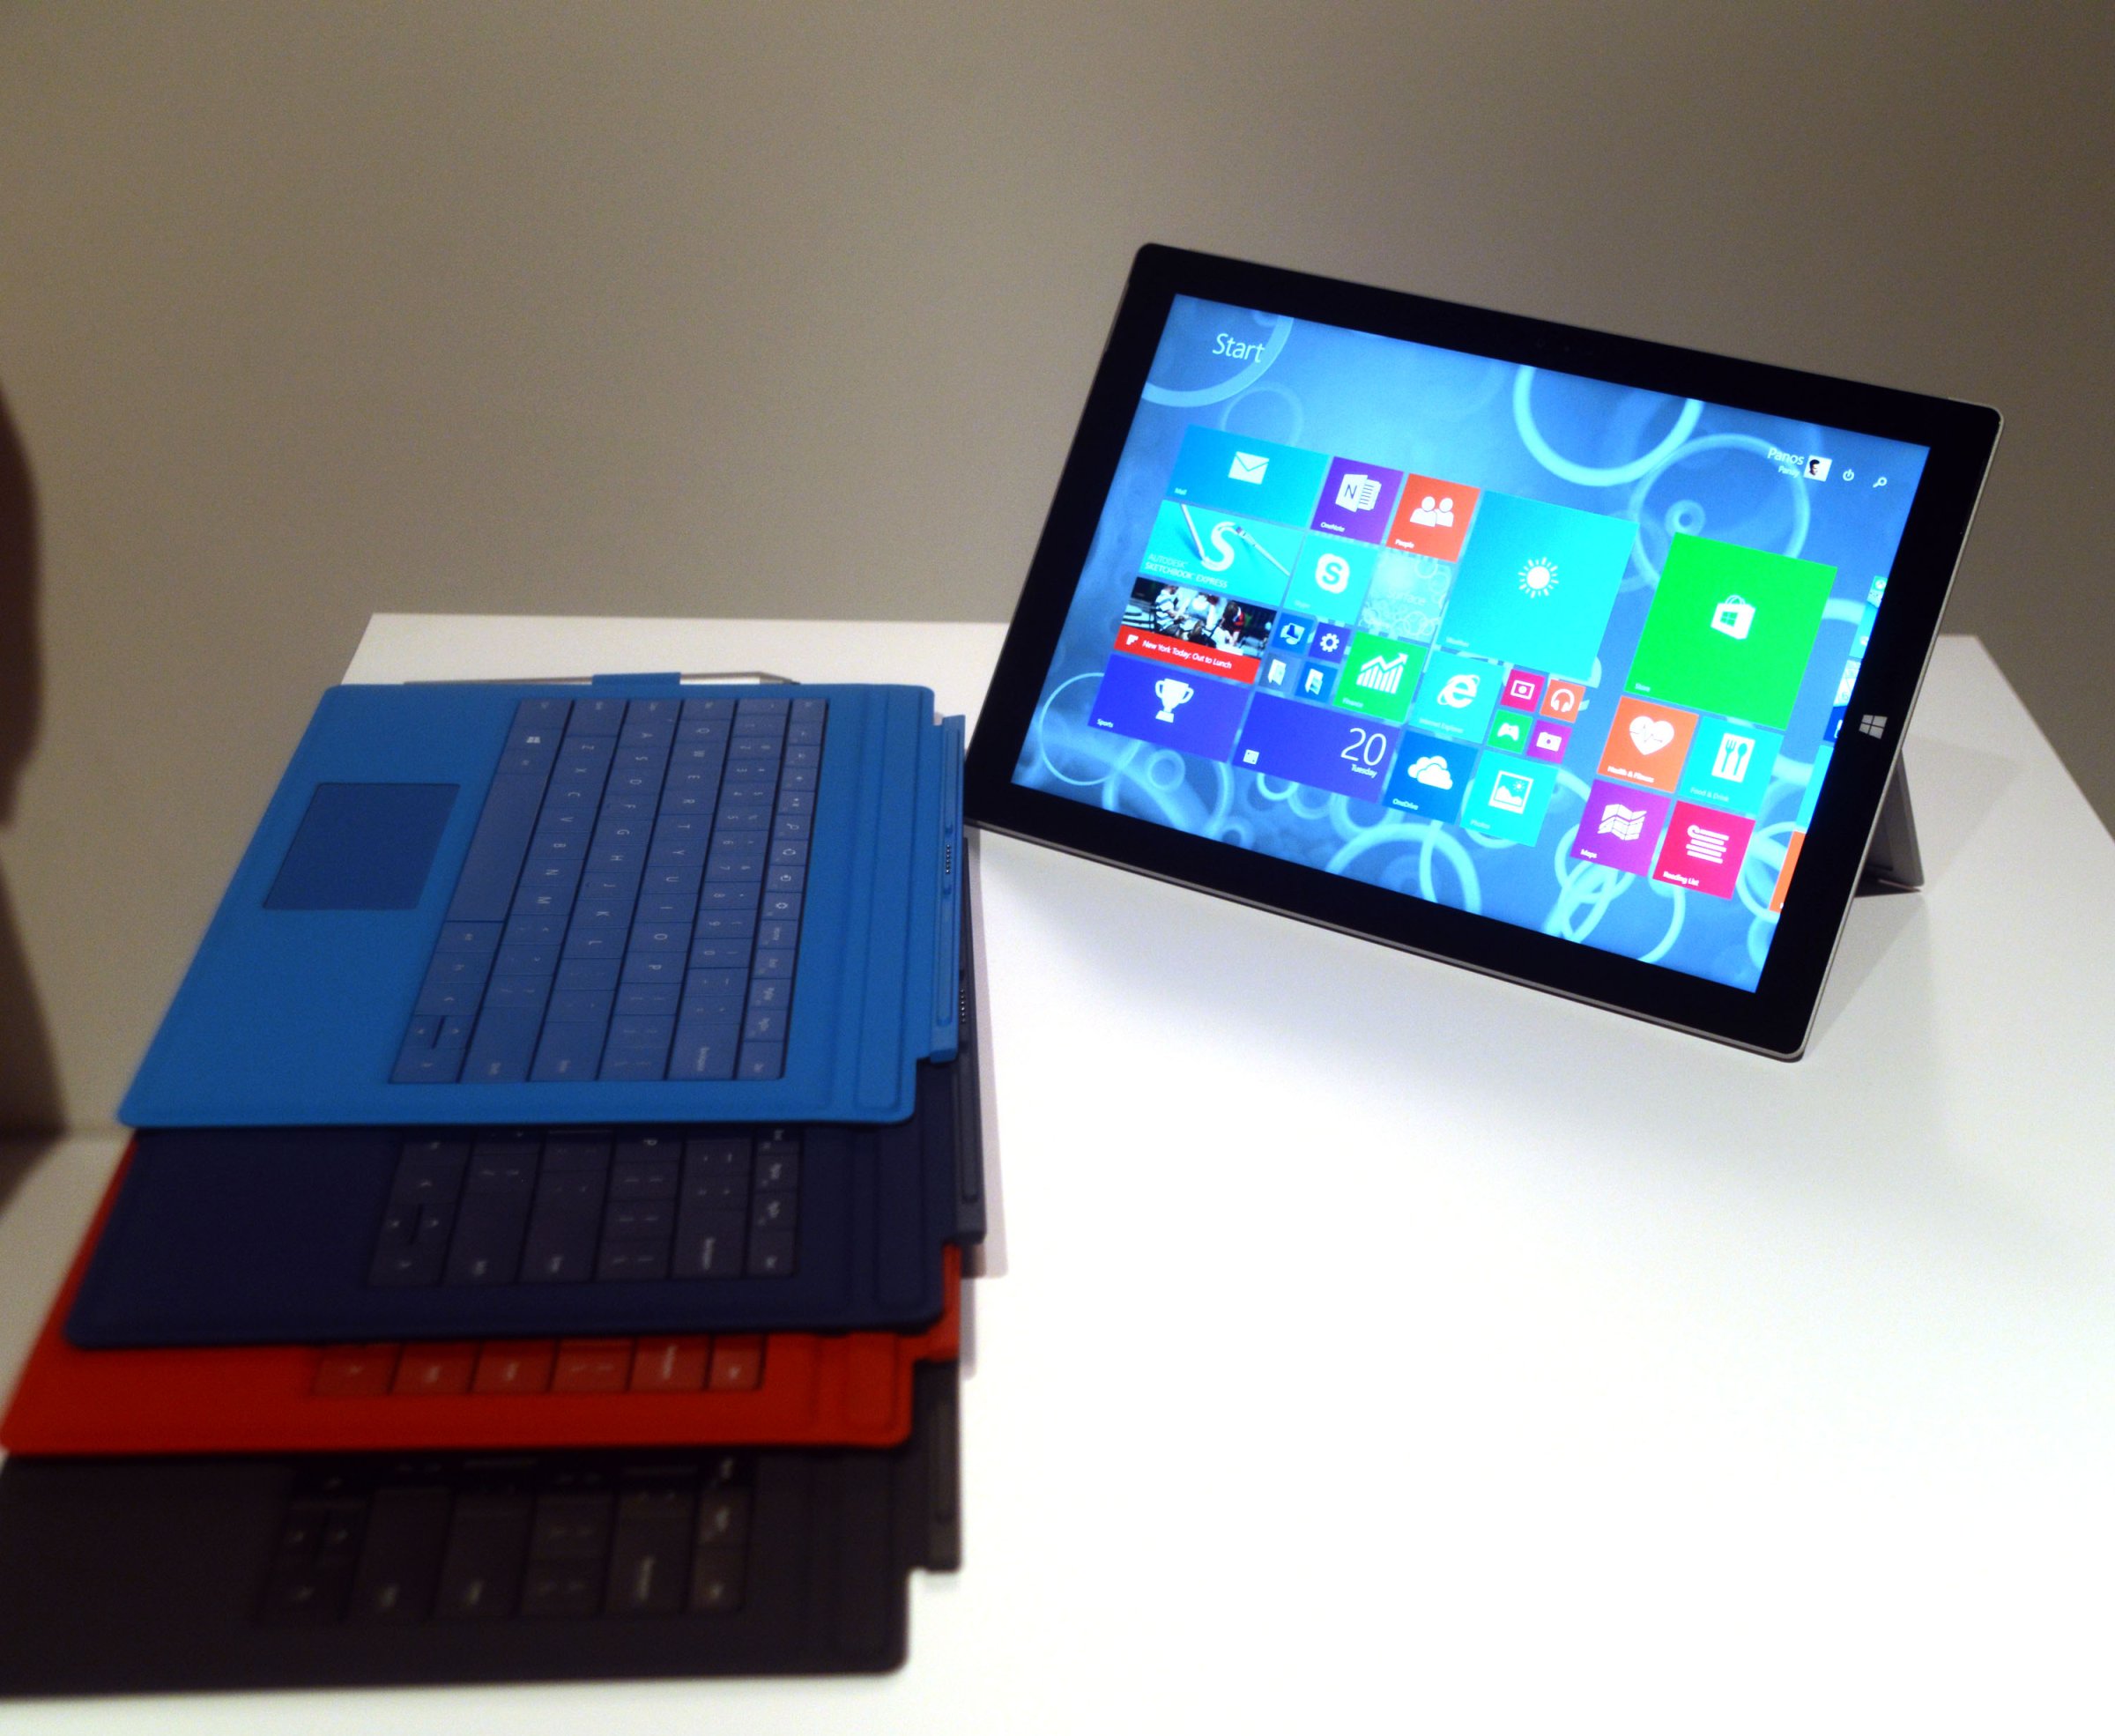 Microsoft PRO 3 Surface Tablet Launch